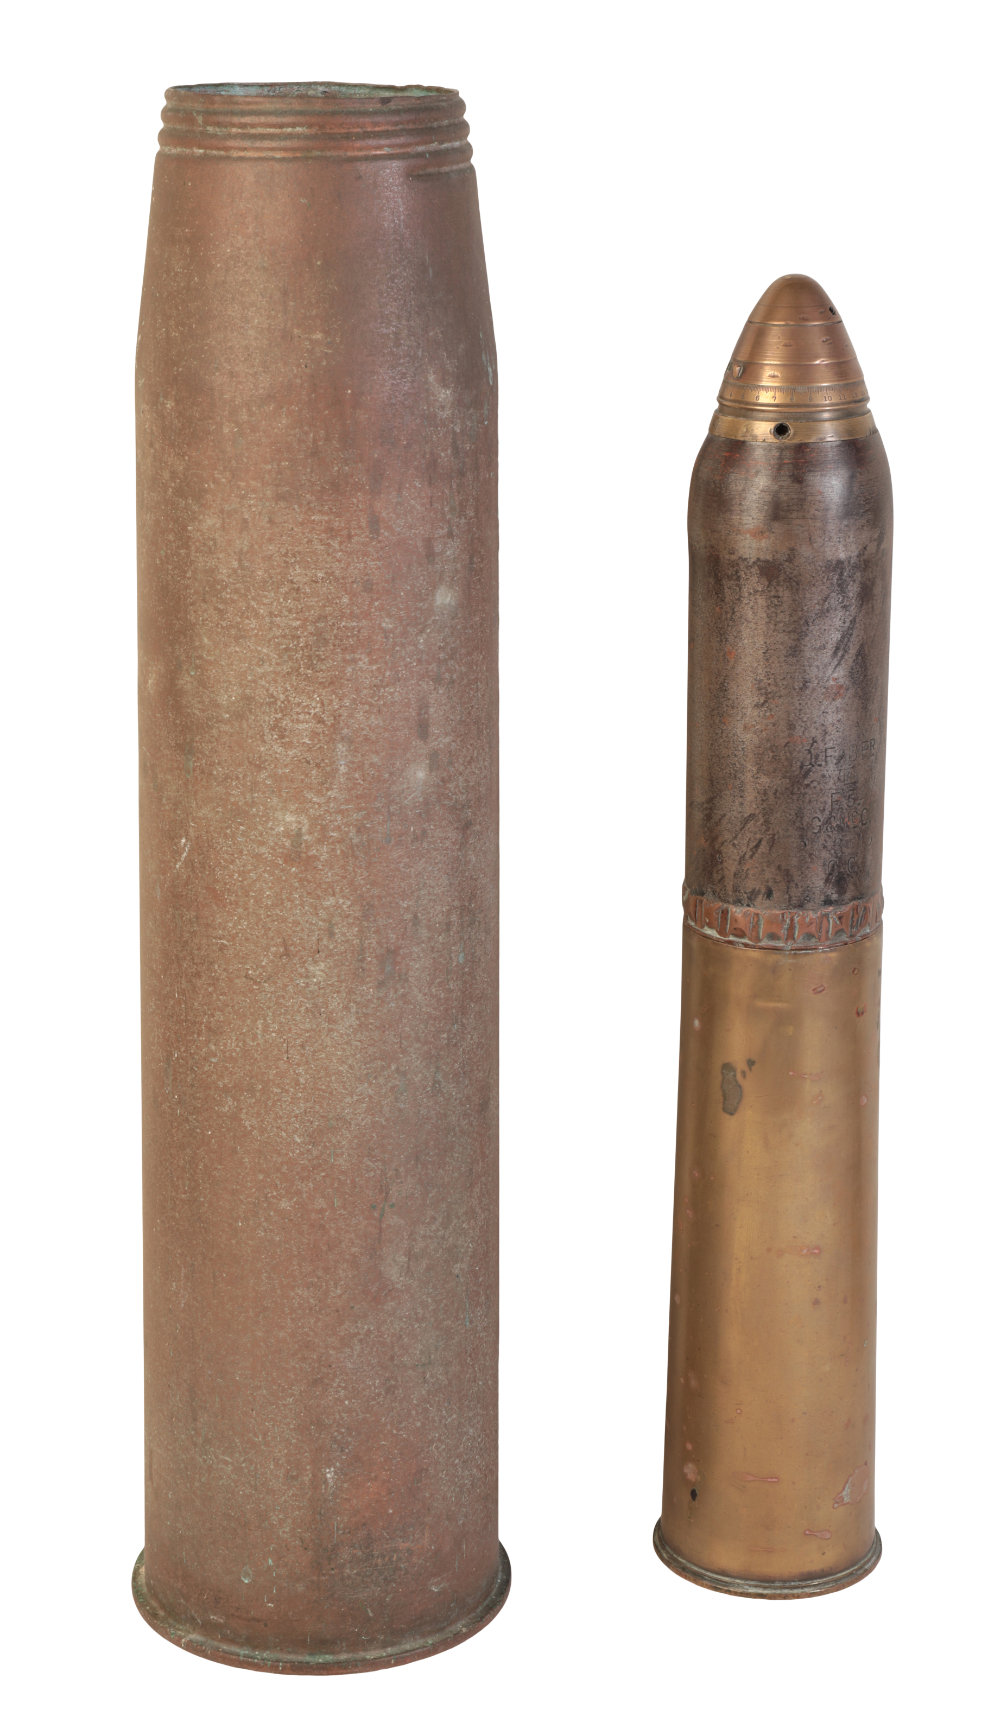 A 1962 BRASS MILITARY SHELL stamped 3adf04